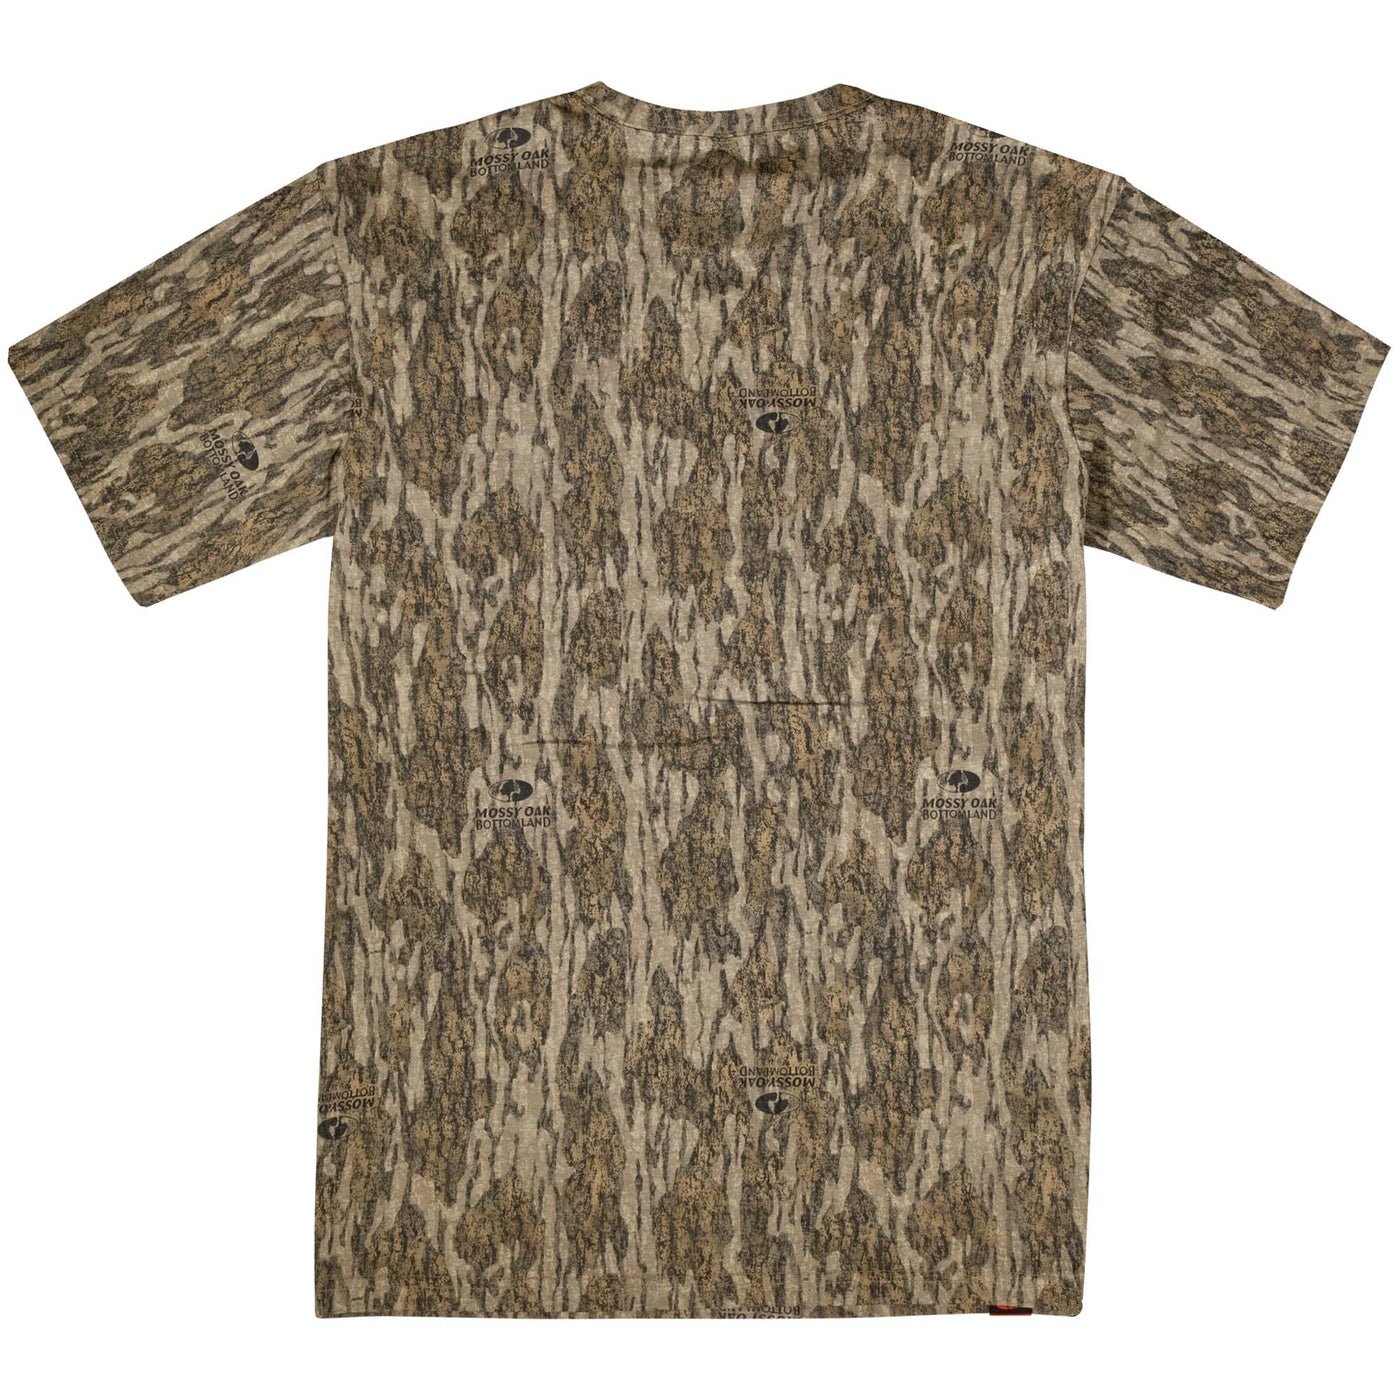 Unisex Camouflage T Shirt Casual Short Sleeve Cotton Blend Tee For